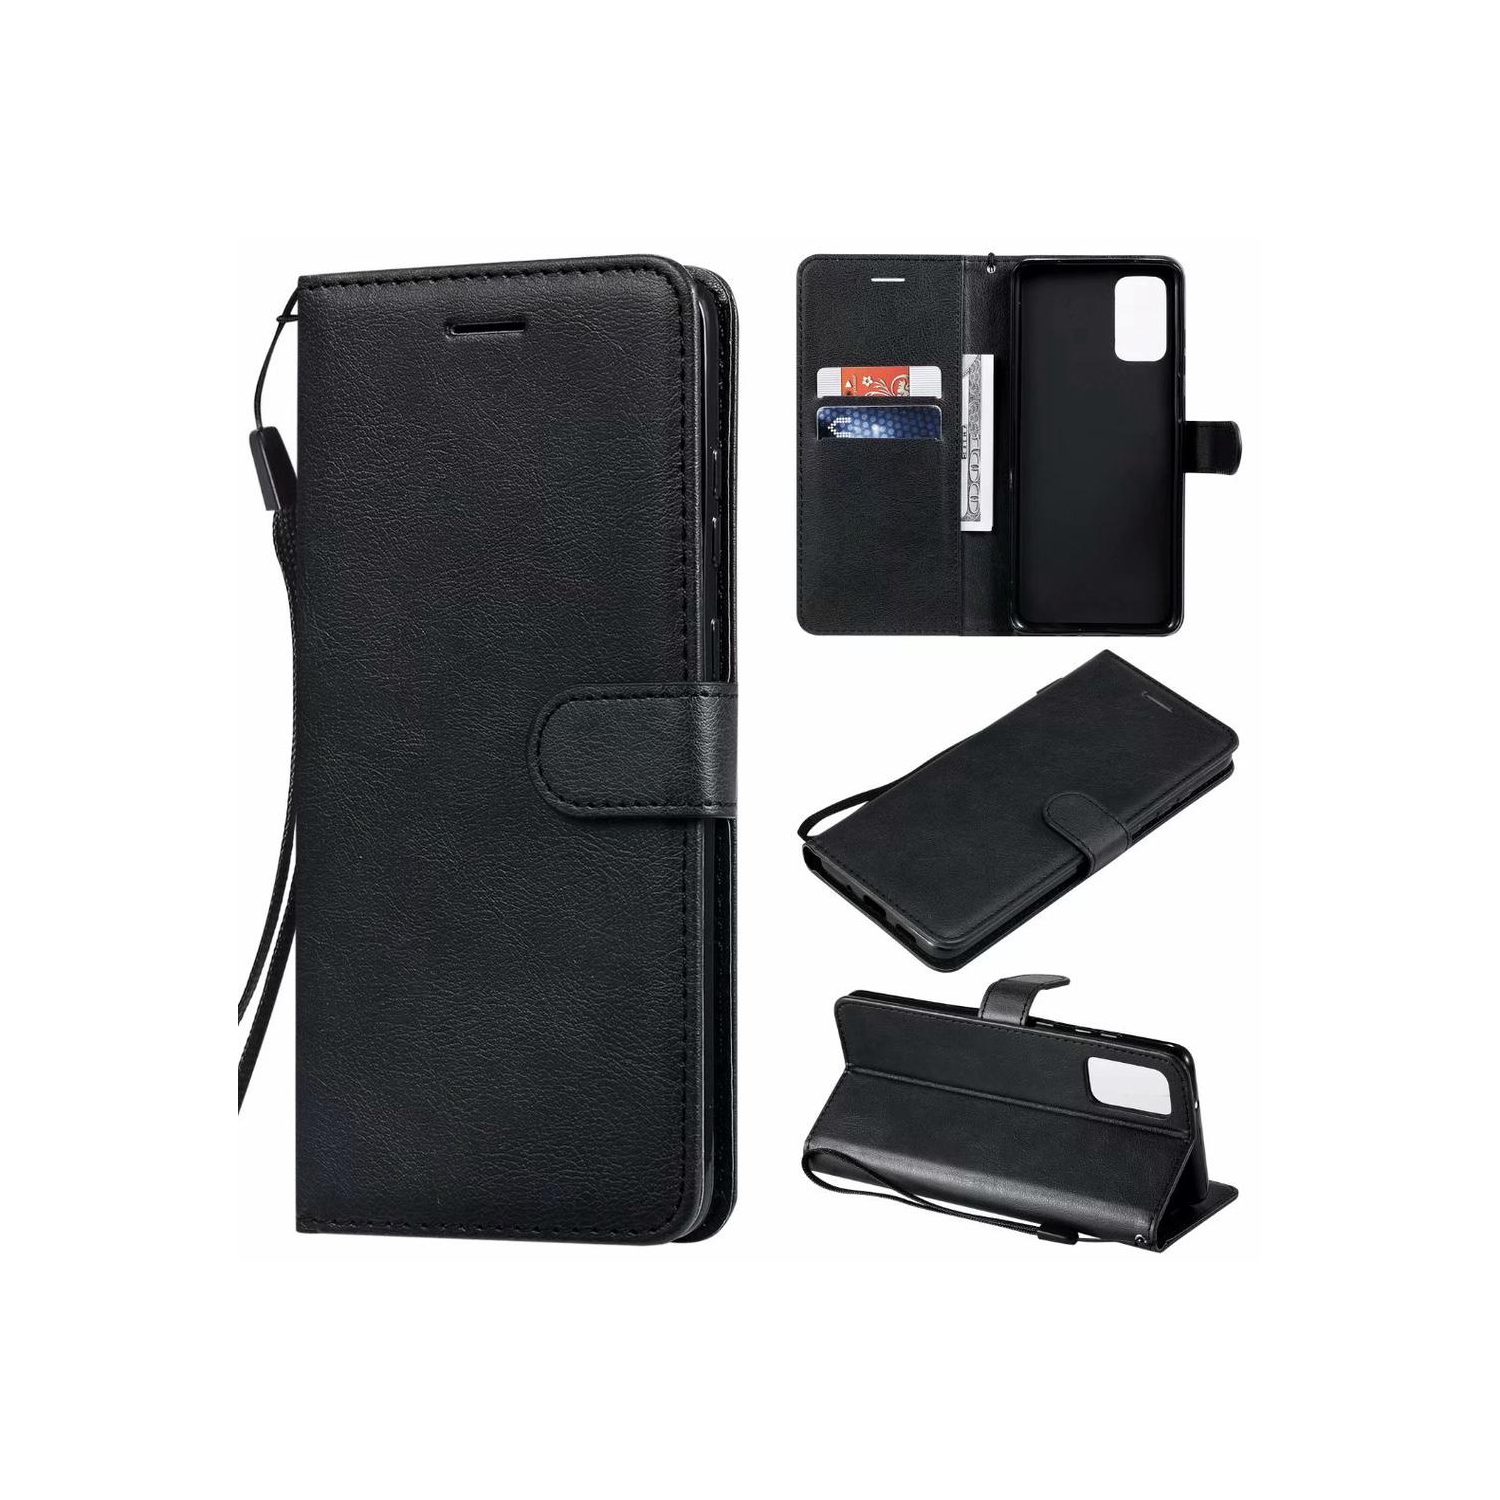 [CS] Samsung Galaxy A32 4G 6.4" Case, Magnetic Leather Folio Wallet Flip Case Cover with Card Slot, Black